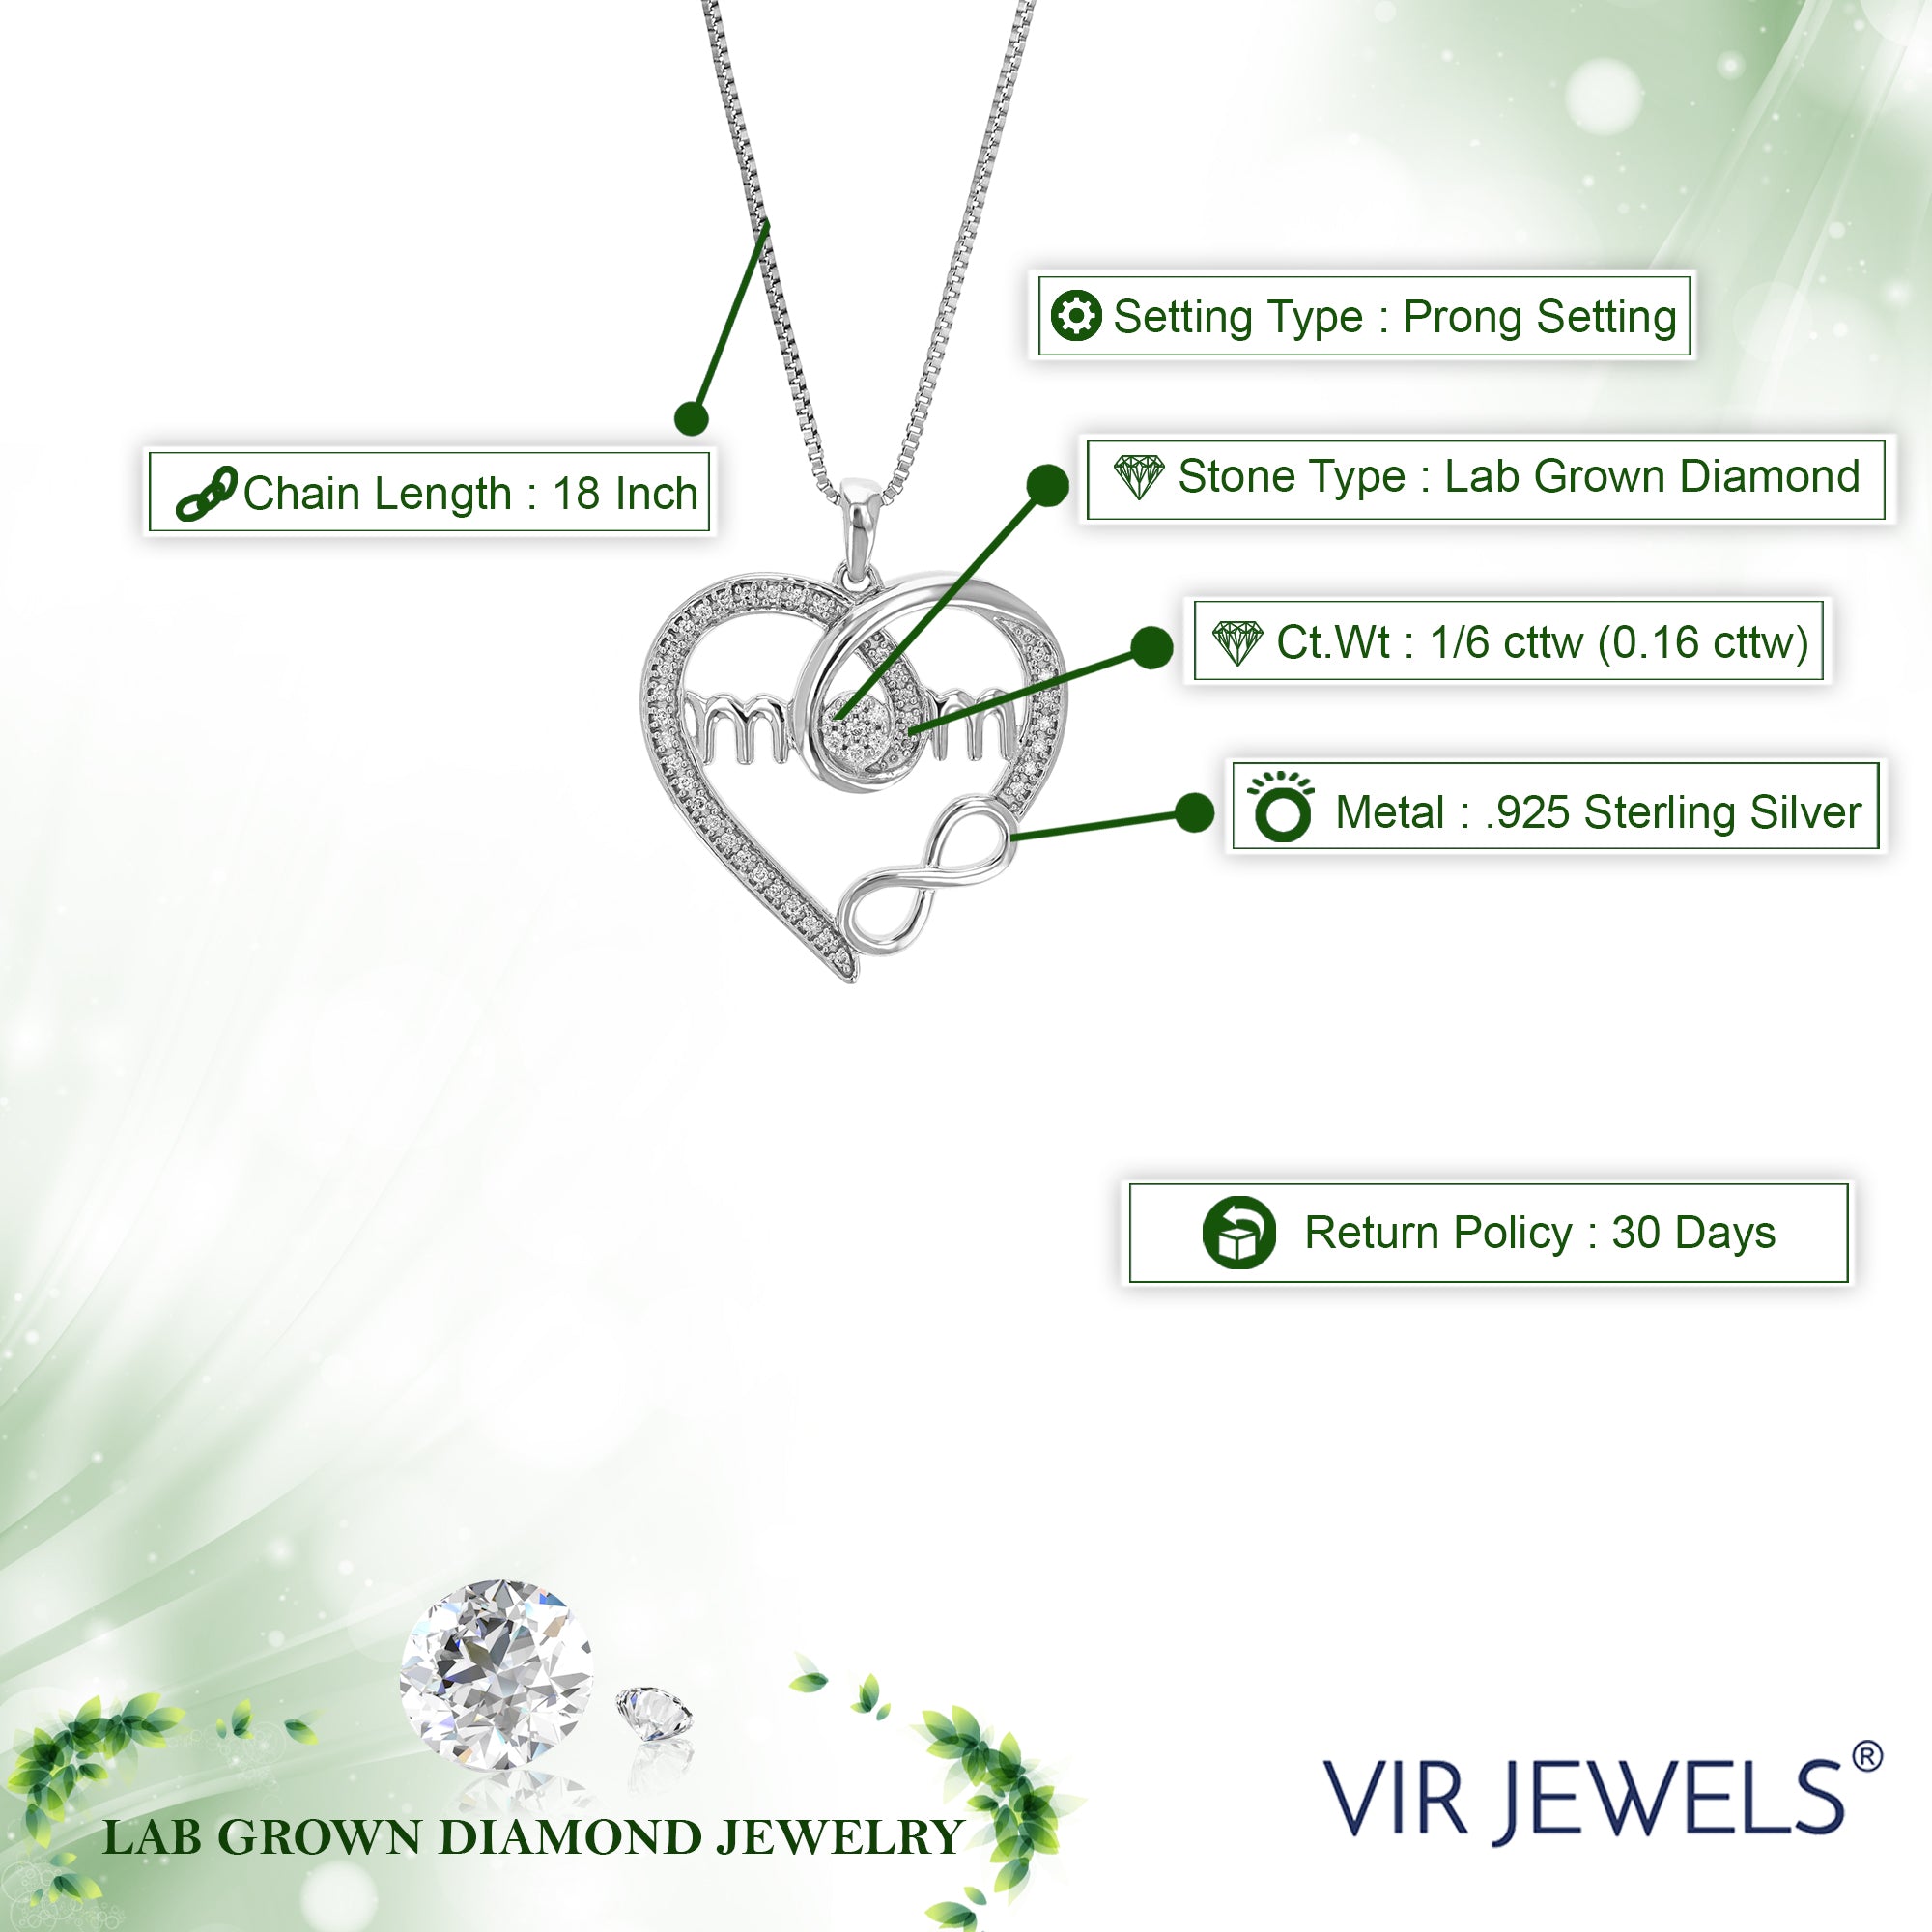 1/6 cttw Diamond Pendant Necklace for Women, Lab Grown Diamond Heart Pendant Necklace in .925 Sterling Silver with Chain, Size 1 Inch